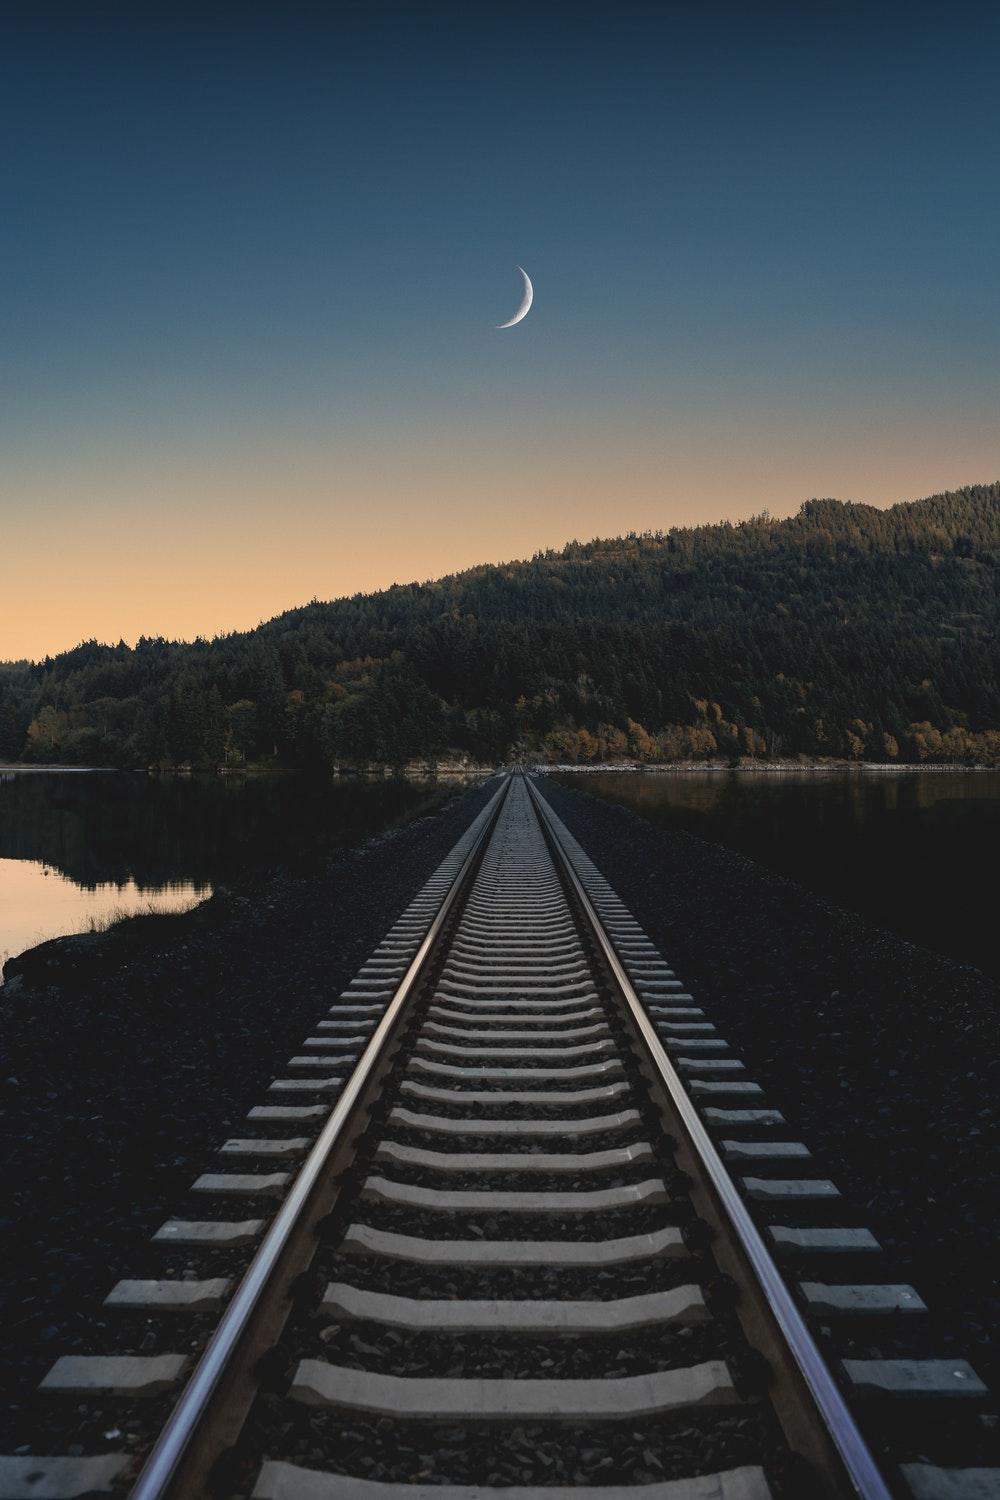 Train track, track, moon and sunset. HD photo